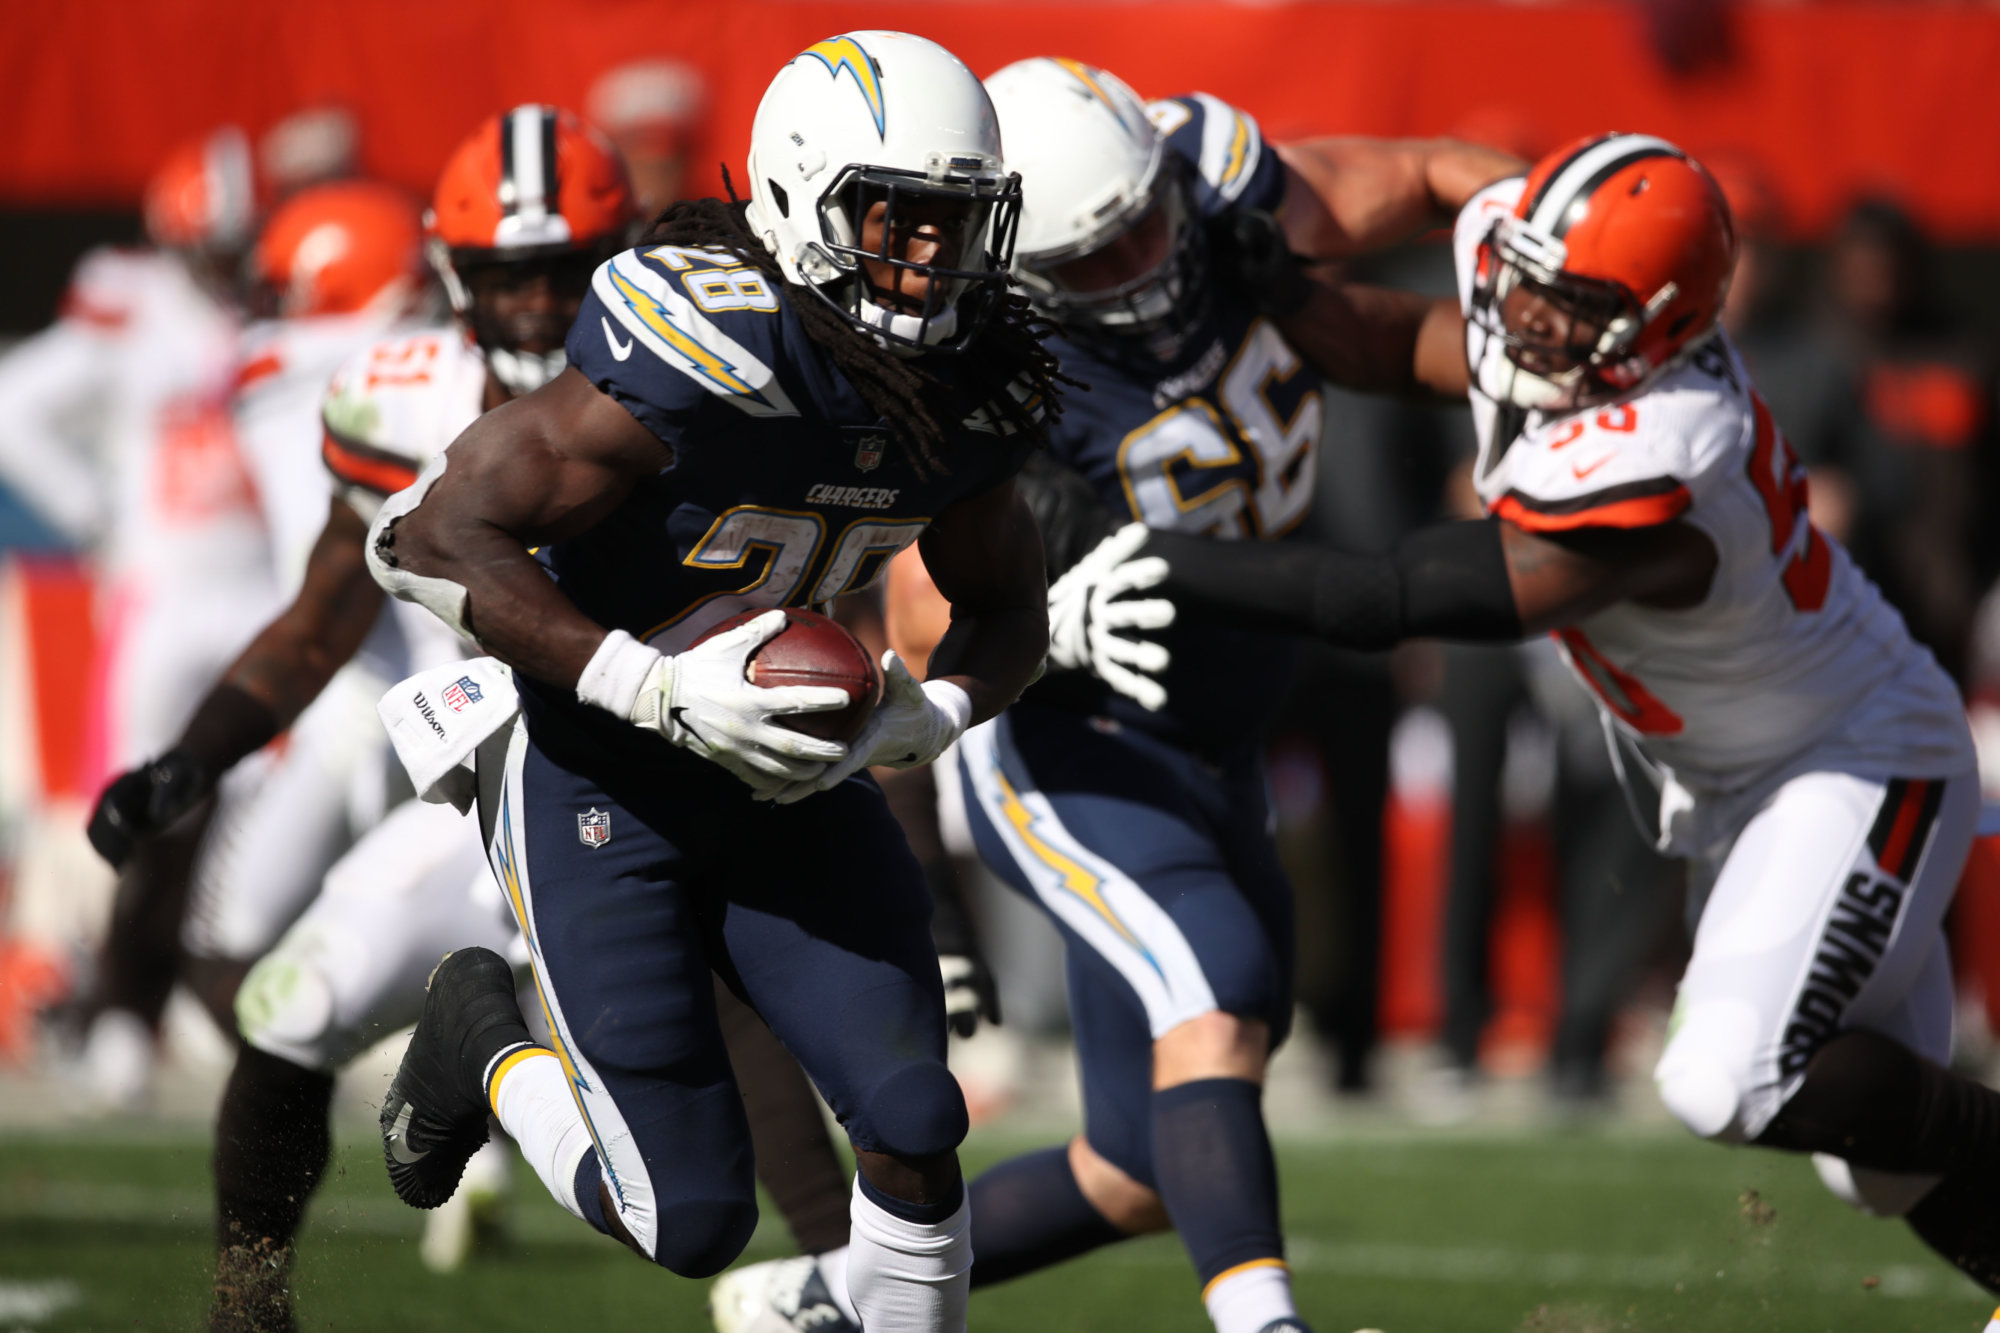 CLEVELAND, OH - OCTOBER 14: Melvin Gordon #28 of the Los Angeles Chargers runs the ball in the second half against the Cleveland Browns at FirstEnergy Stadium on October 14, 2018 in Cleveland, Ohio.  The Los Angeles Chargers won 38 to 14. (Photo by Gregory Shamus/Getty Images)